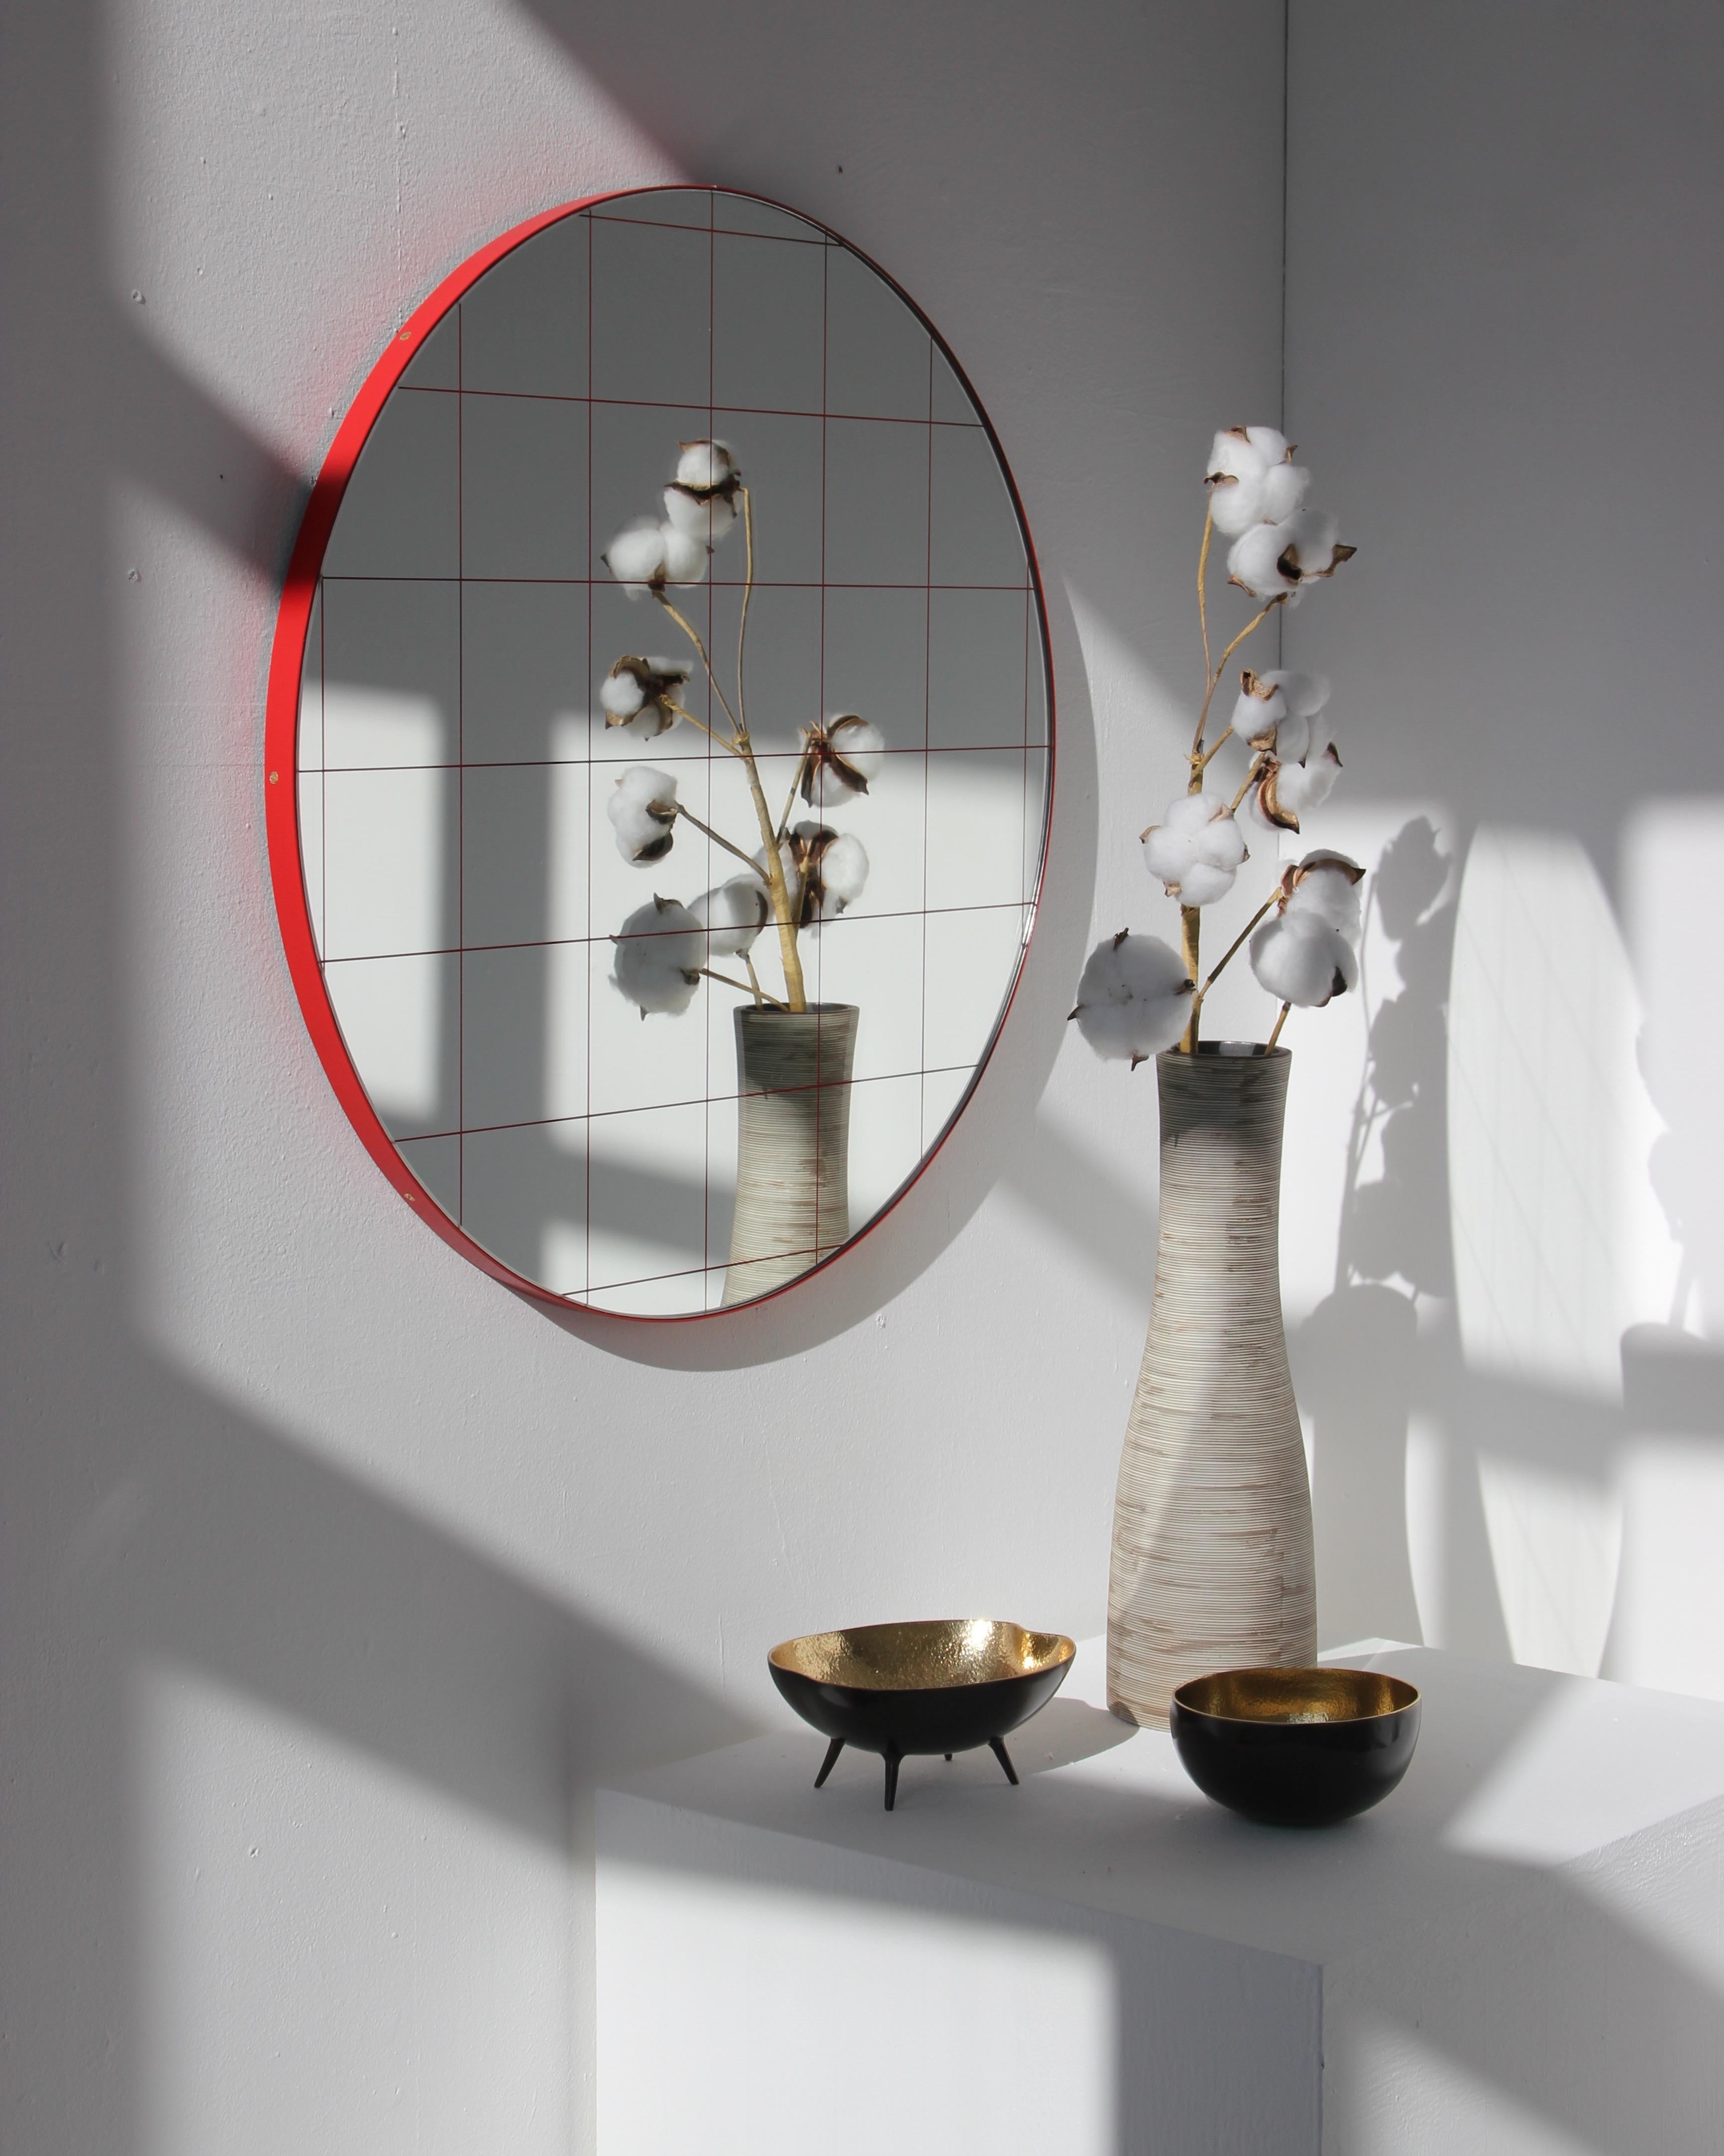 Modern decorative round Orbis mirror with a red grid and a powder coated red frame. Designed and handcrafted in London, UK.

Medium, large and extra-large mirrors (60, 80 and 100cm) are fitted with an ingenious French cleat (split batten) system so